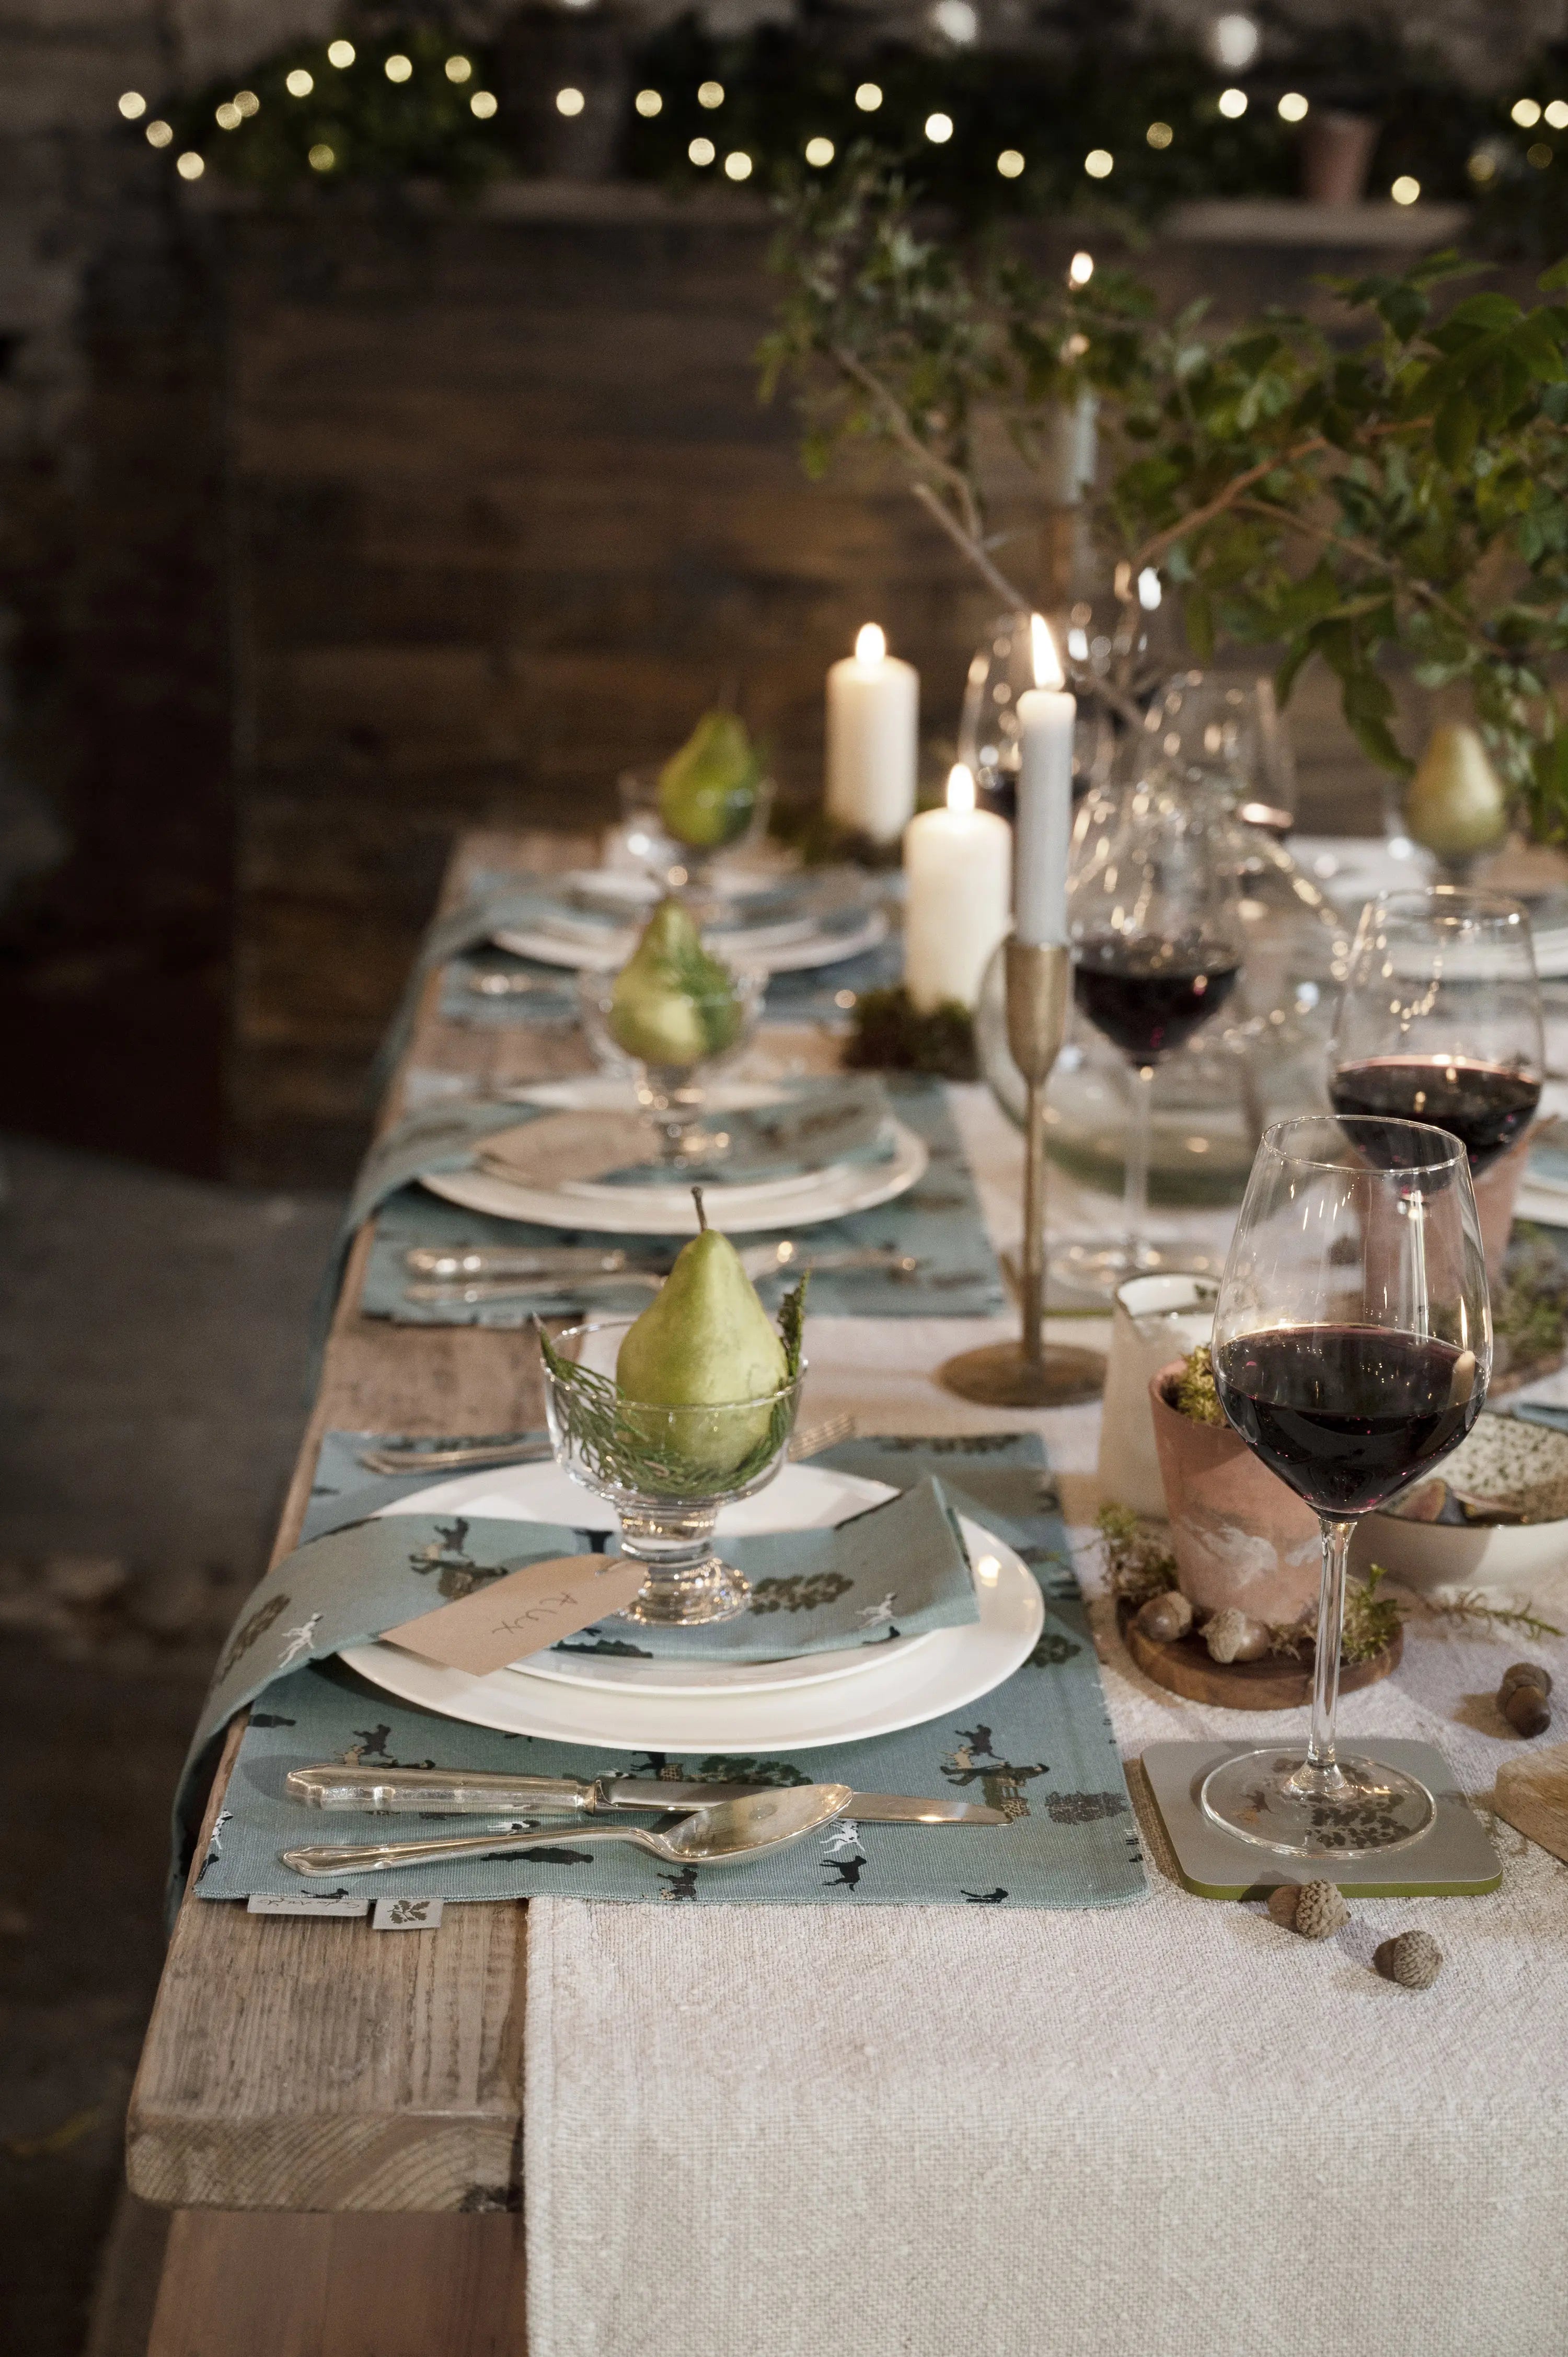 Sophie’s Tips For Styling The Table For Autumn